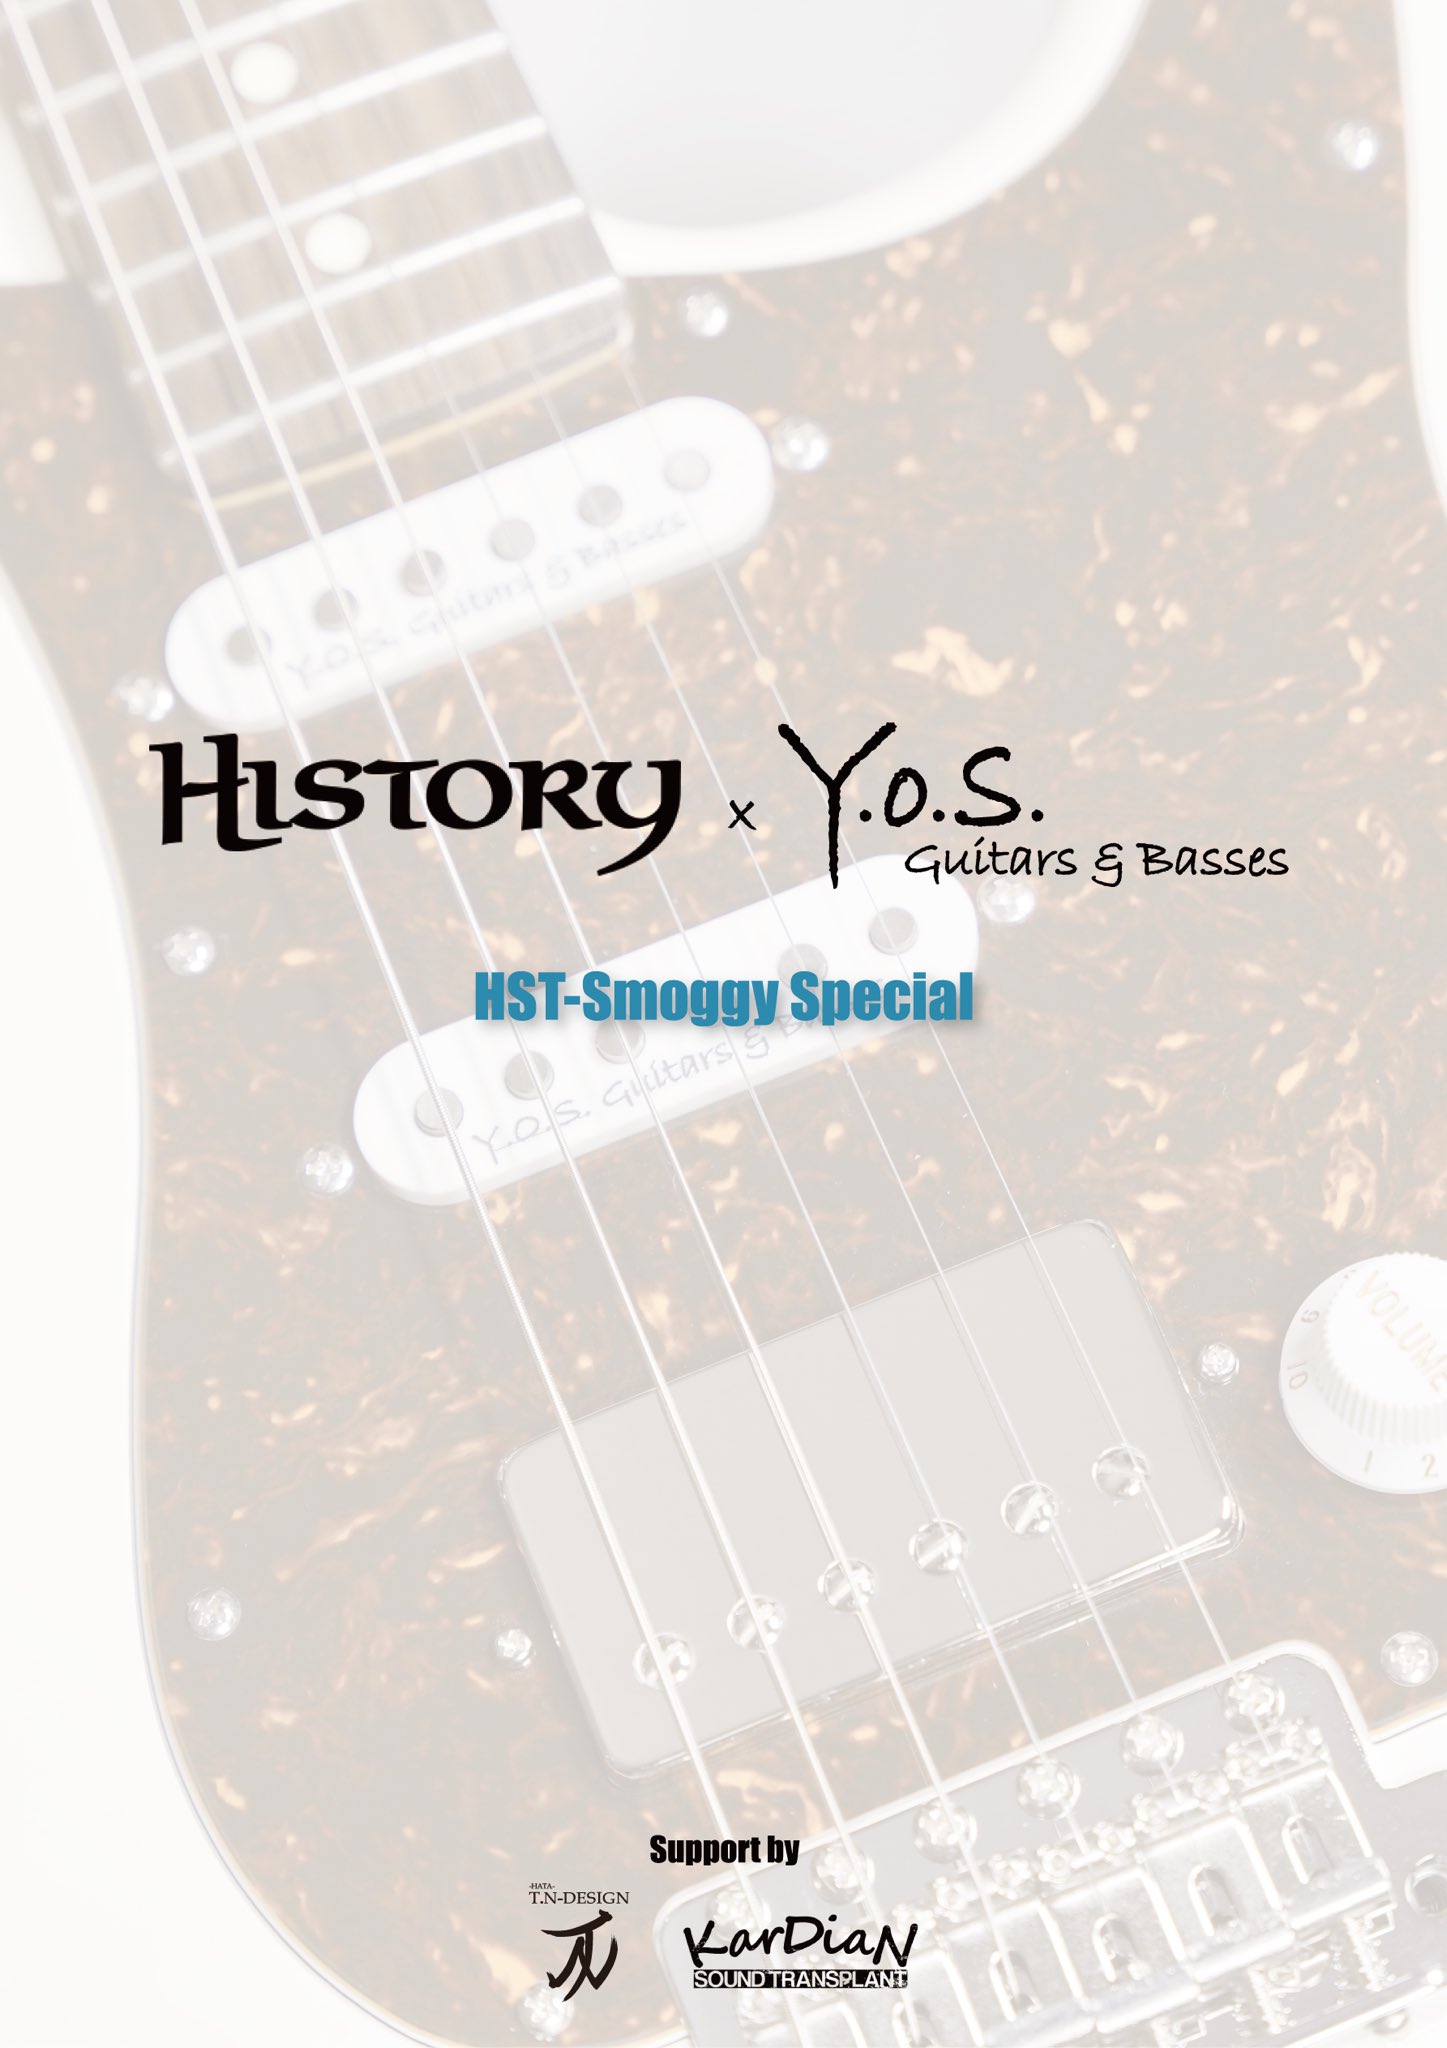 HISTORY×Y.O.S.ギター工房 コラボレーションモデル「HST-Smoggy 